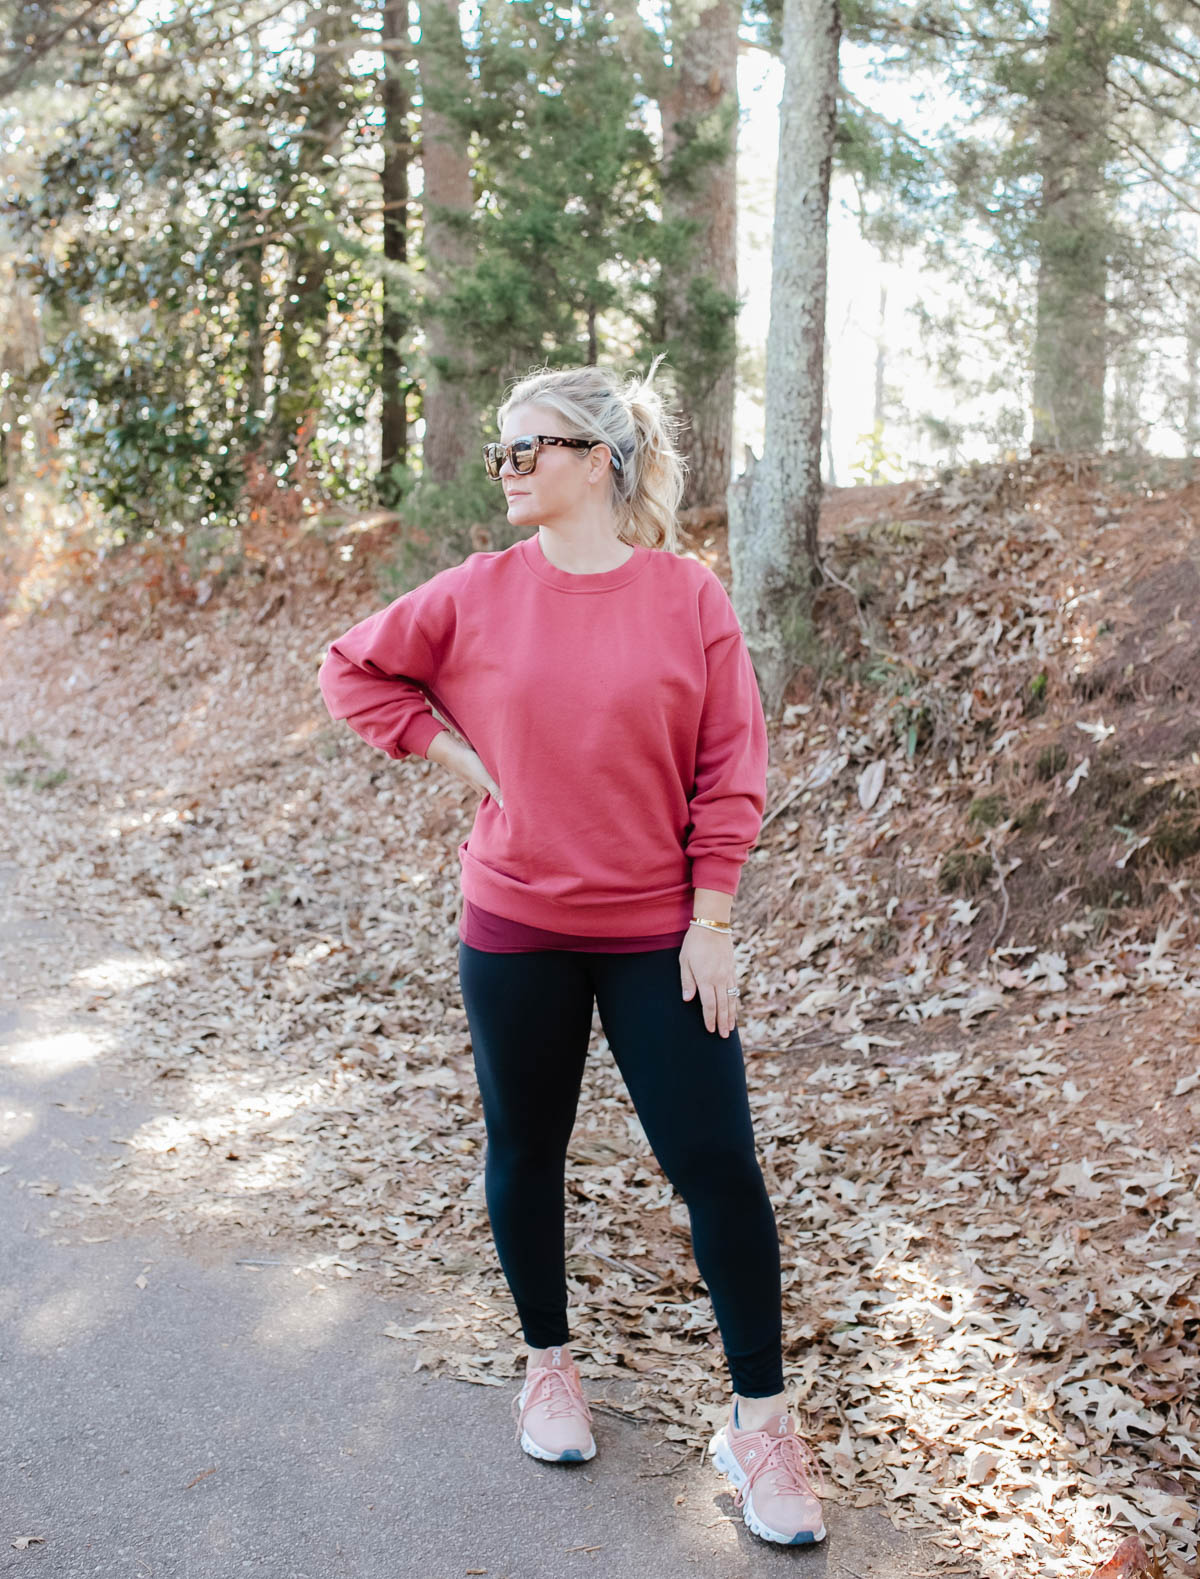 Cristin Cooper showing off everyday athleisure style from lululemon.